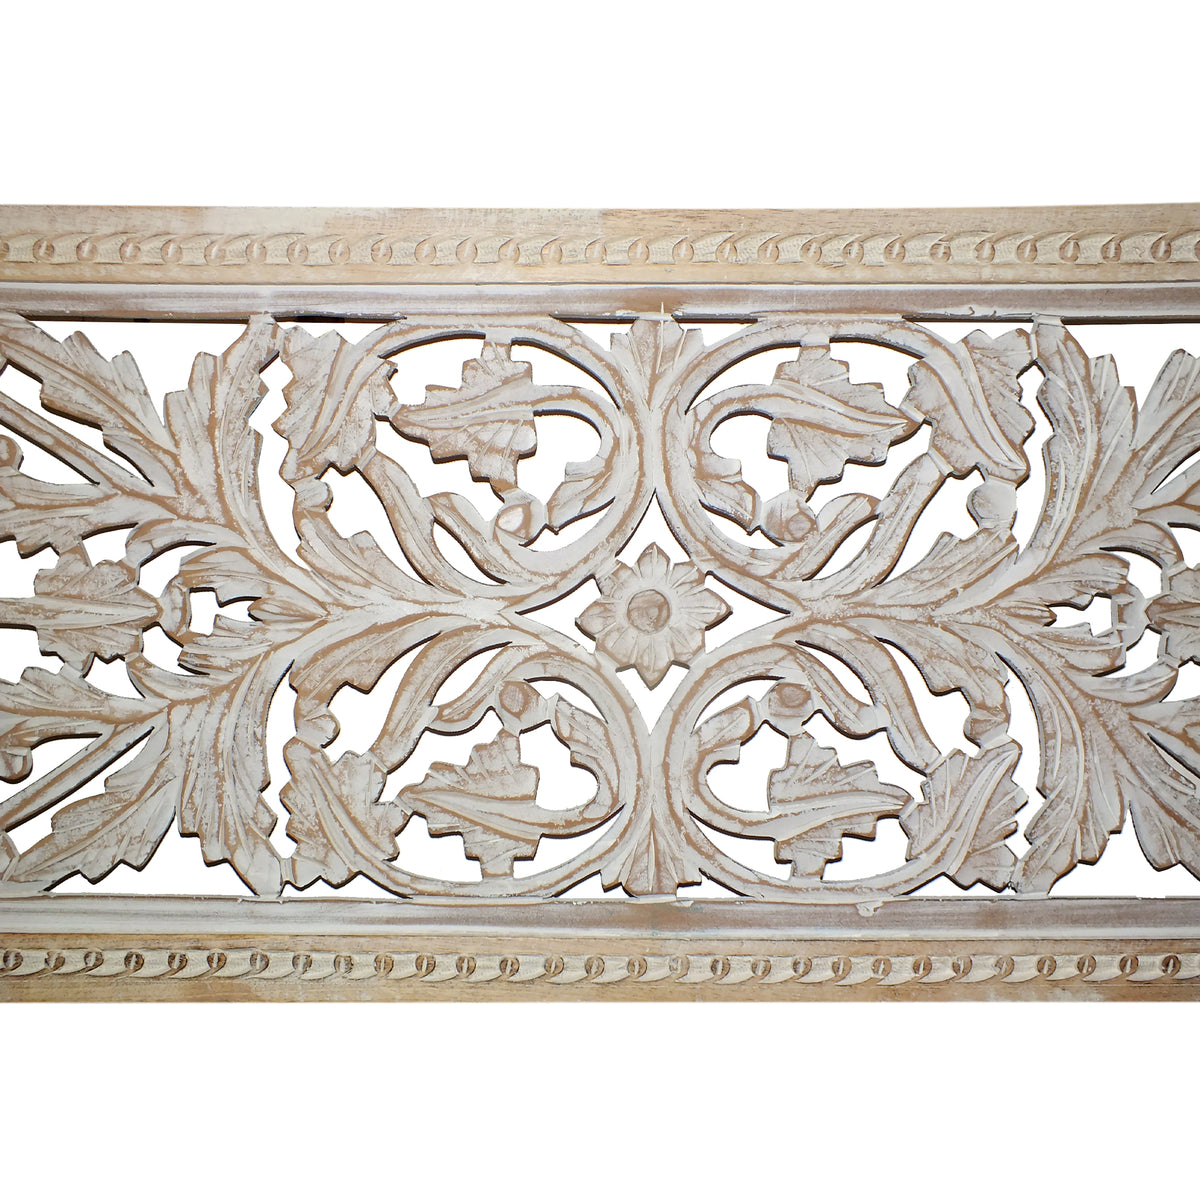 Attractive Mango Wood Wall Panel Hand Crafted With Intricate Details, White - BM01909